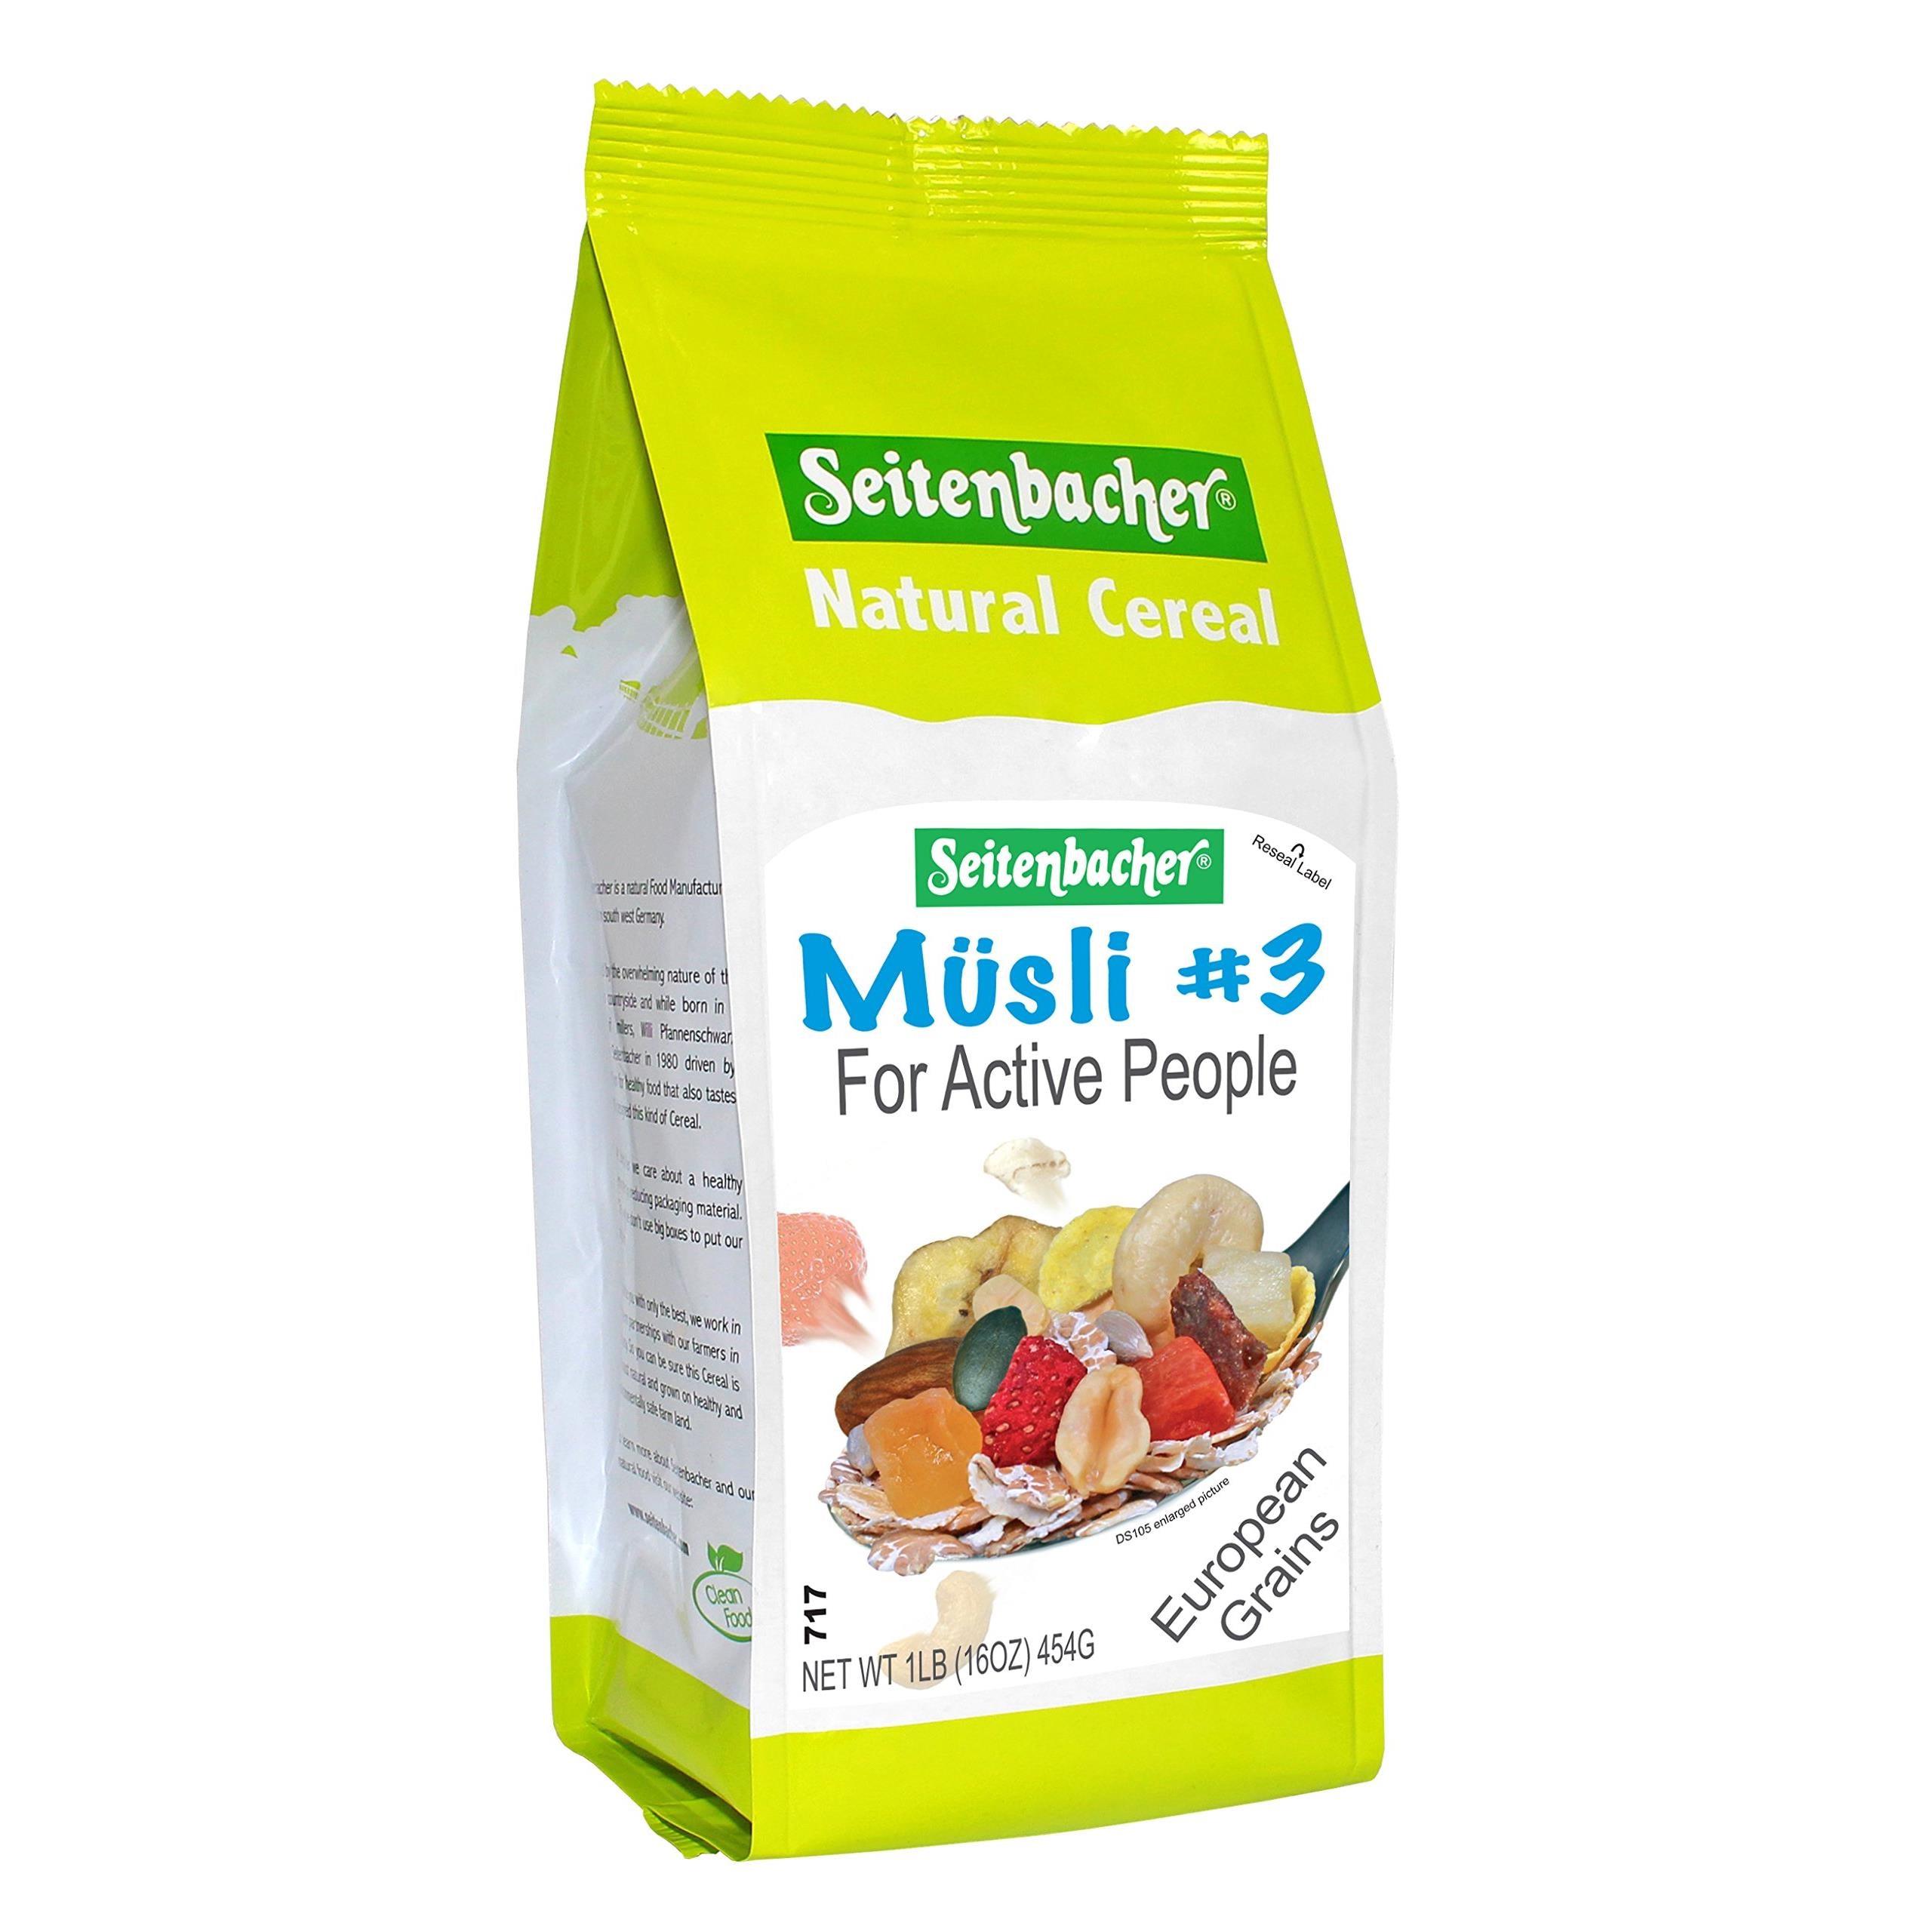 Seitenbacher Musli #3 For Active People 16 Oz (Pack of 3)